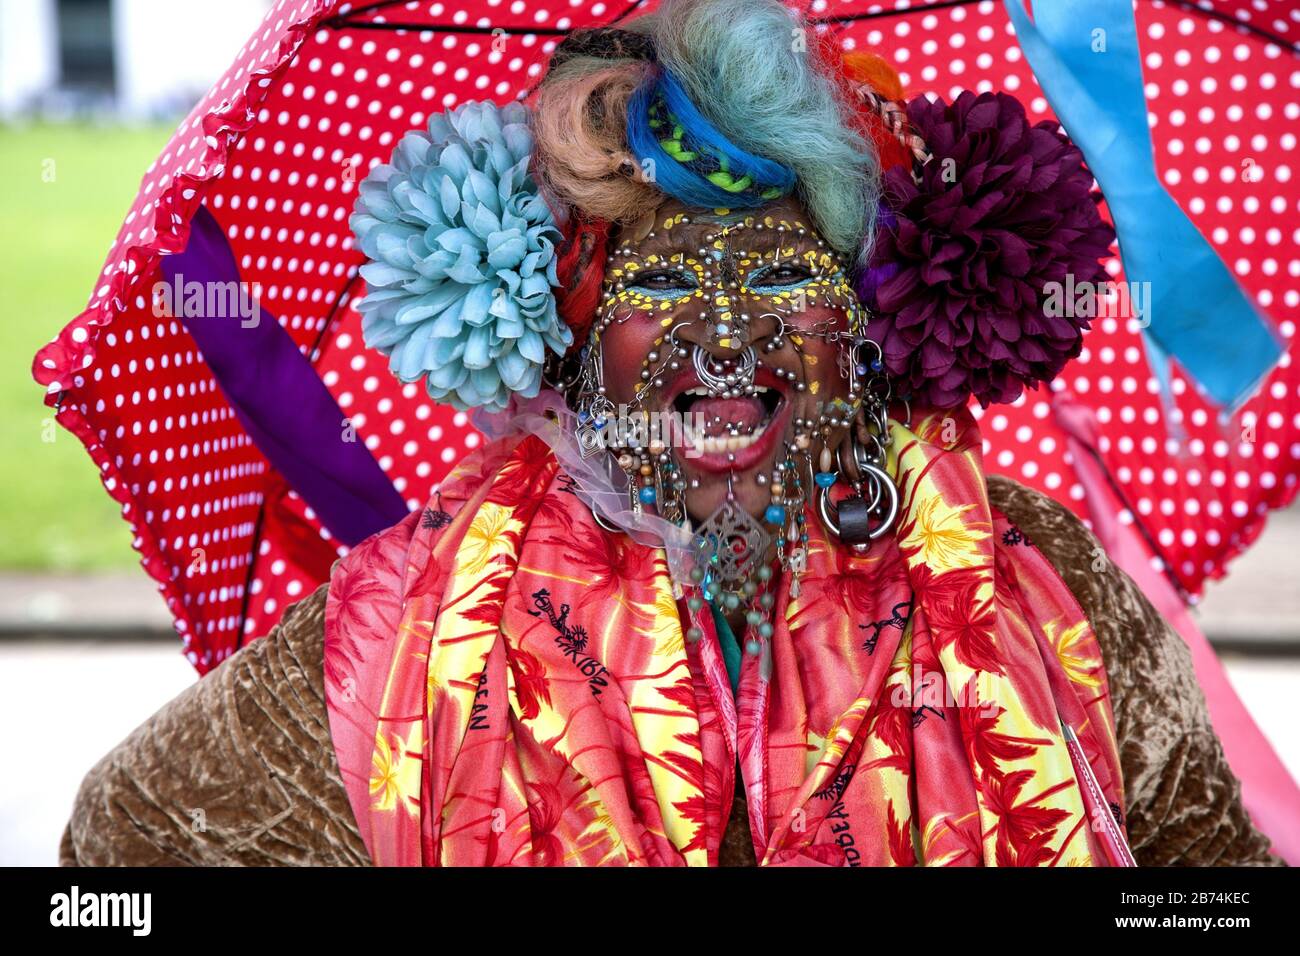 LONDON, UNITED KINGDOM - Jun 19, 2010: Elaine Davidson, according to the Guinness Book of Records,  the most pierced woman in the world. In 2019 the r Stock Photo